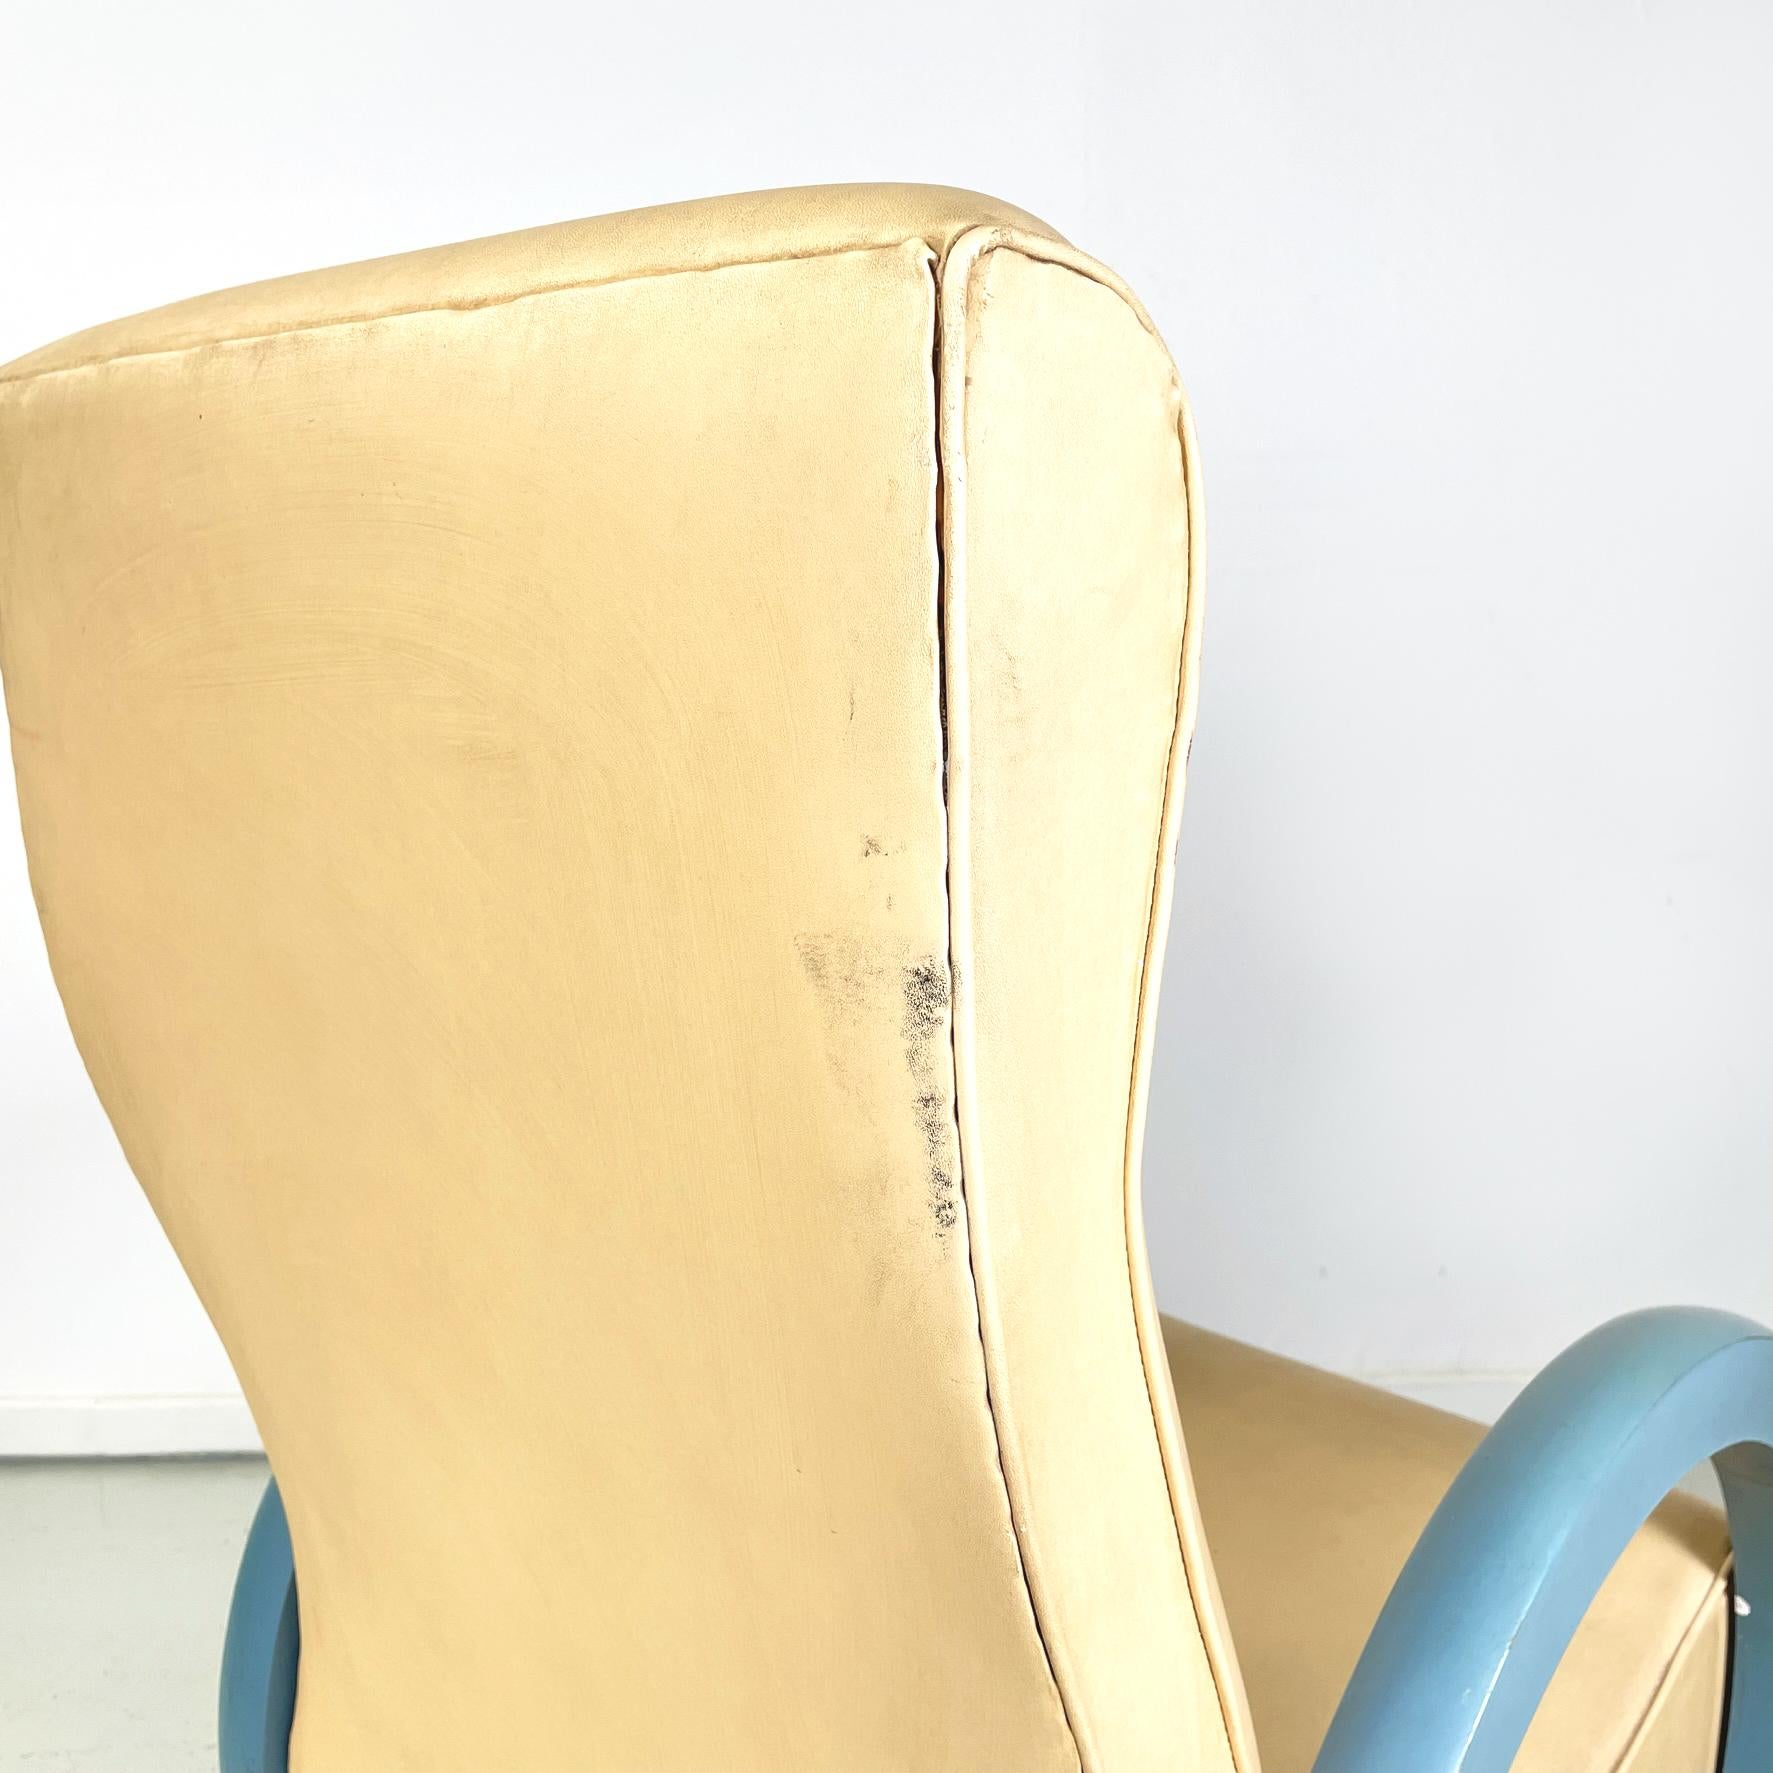 Italian Modern Armchair in Beige Leather and Light Blue Wood, 1980s For Sale 11